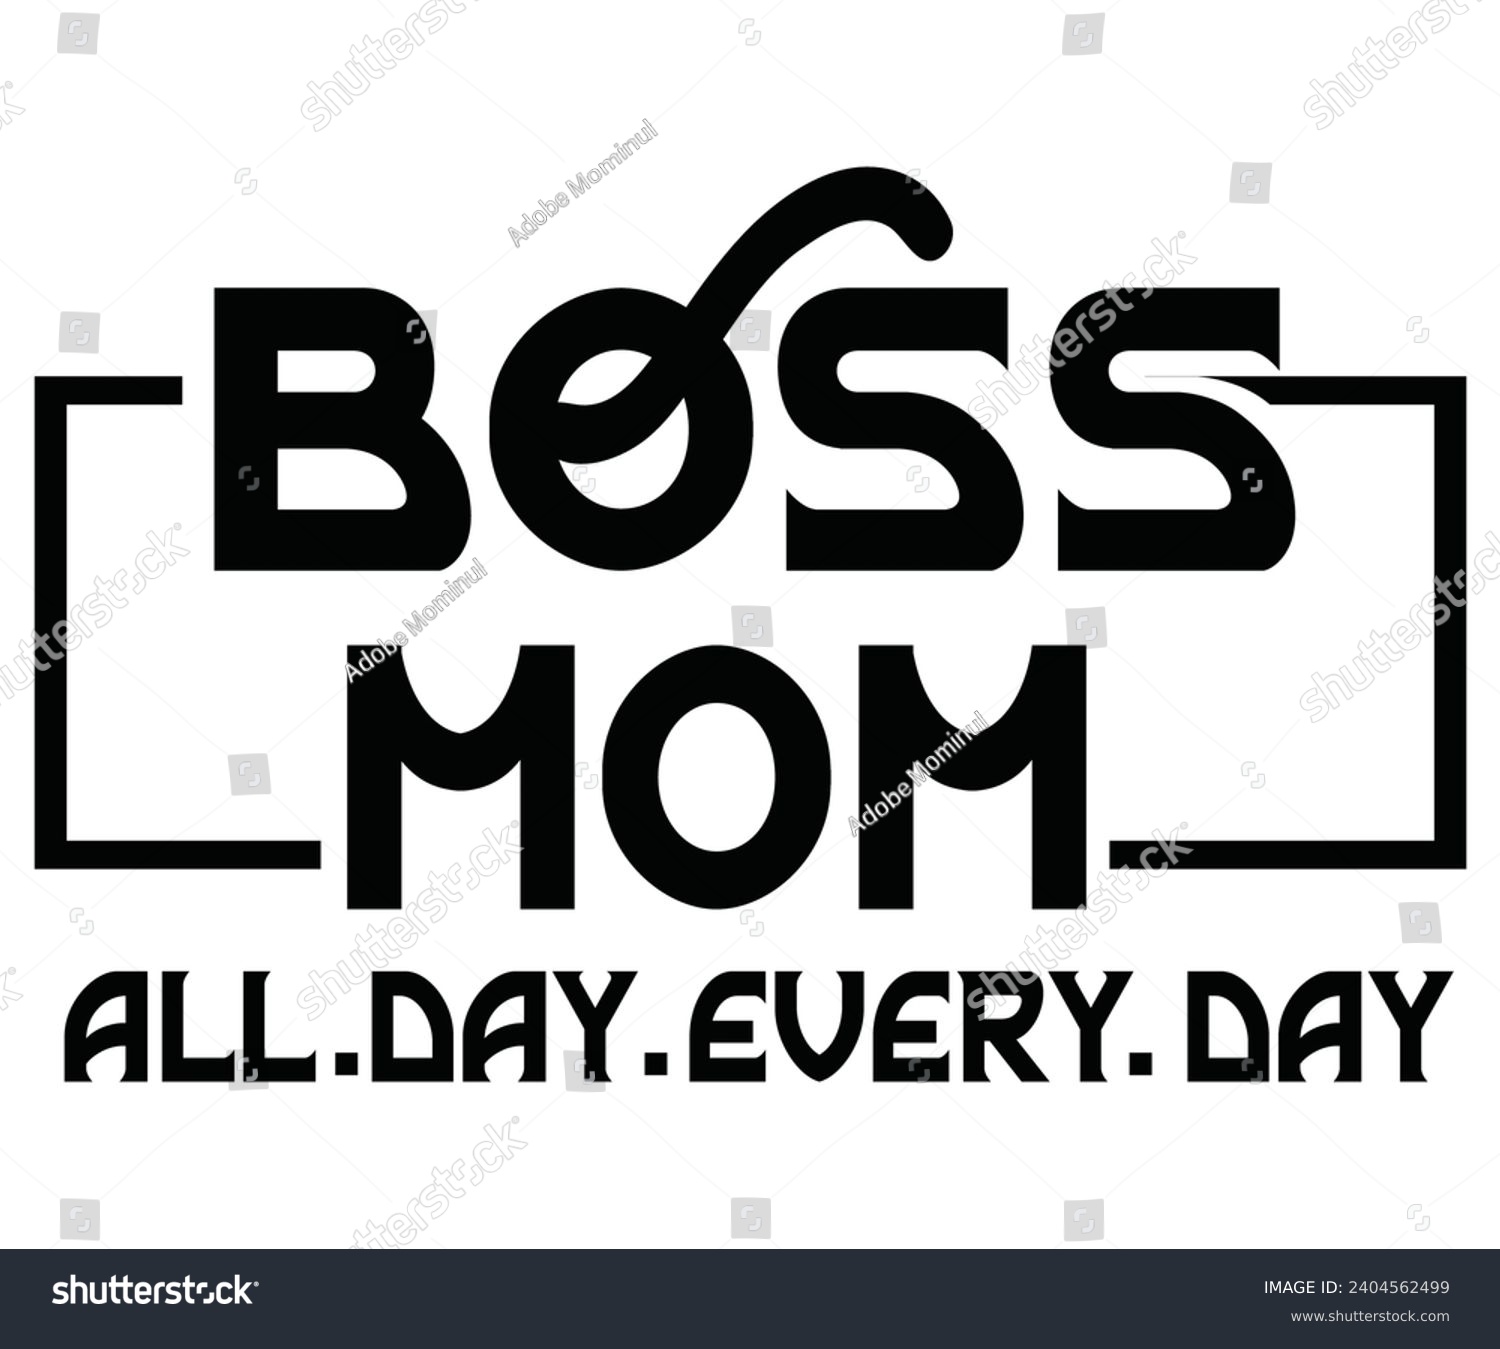 SVG of Boss Mom All Day Every Day Svg,Happy Boss svg,Boss Saying Quotes,Boss Day T-shirt,Gift for Boss,Great Jobs,Happy Bosses Day T-shirt,Girl Boss Shirt,Motivational Boss,Cut File, svg